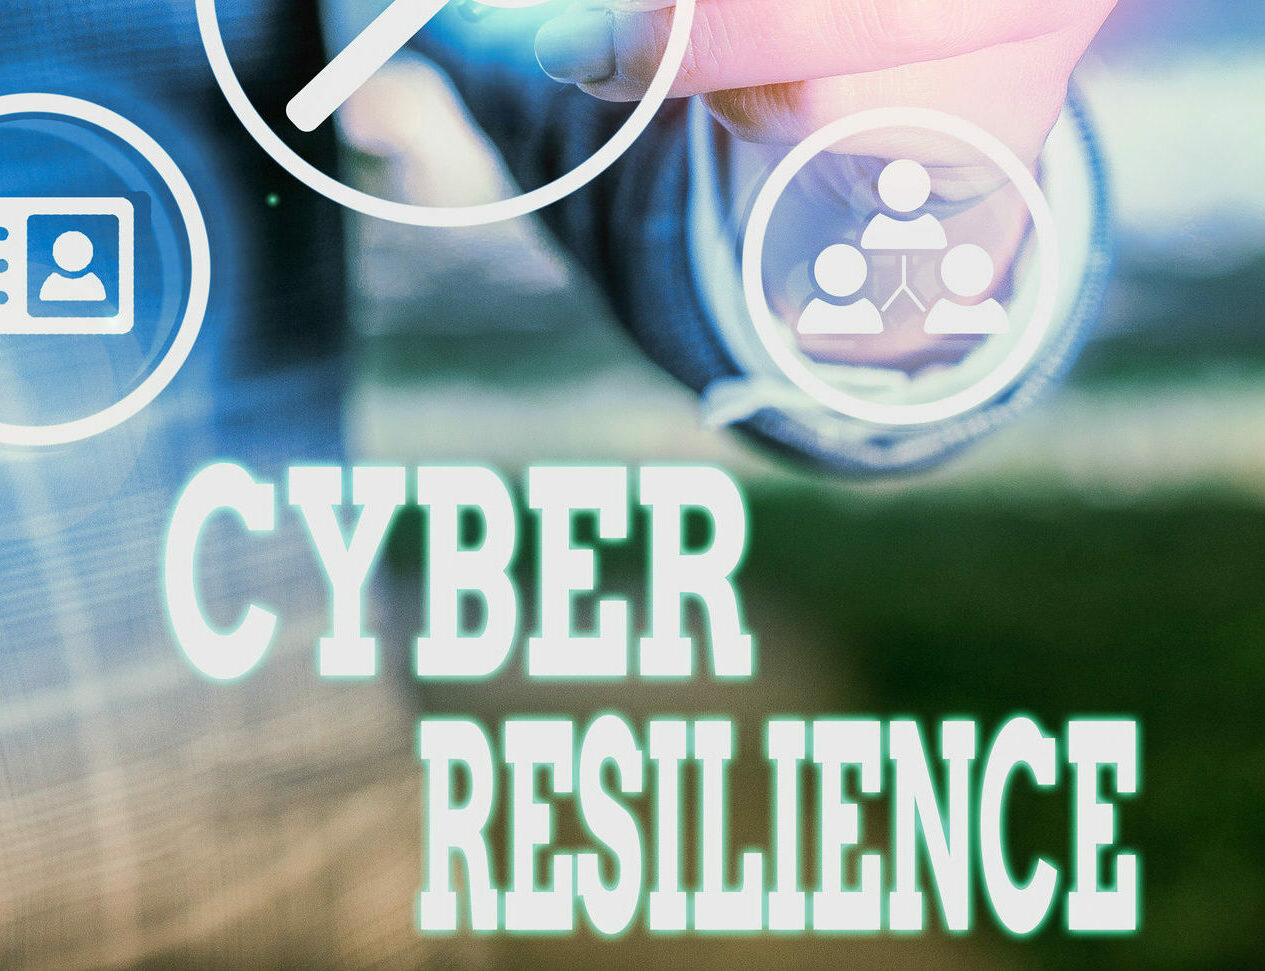 What is Cyber Resilience and Why is it Important?